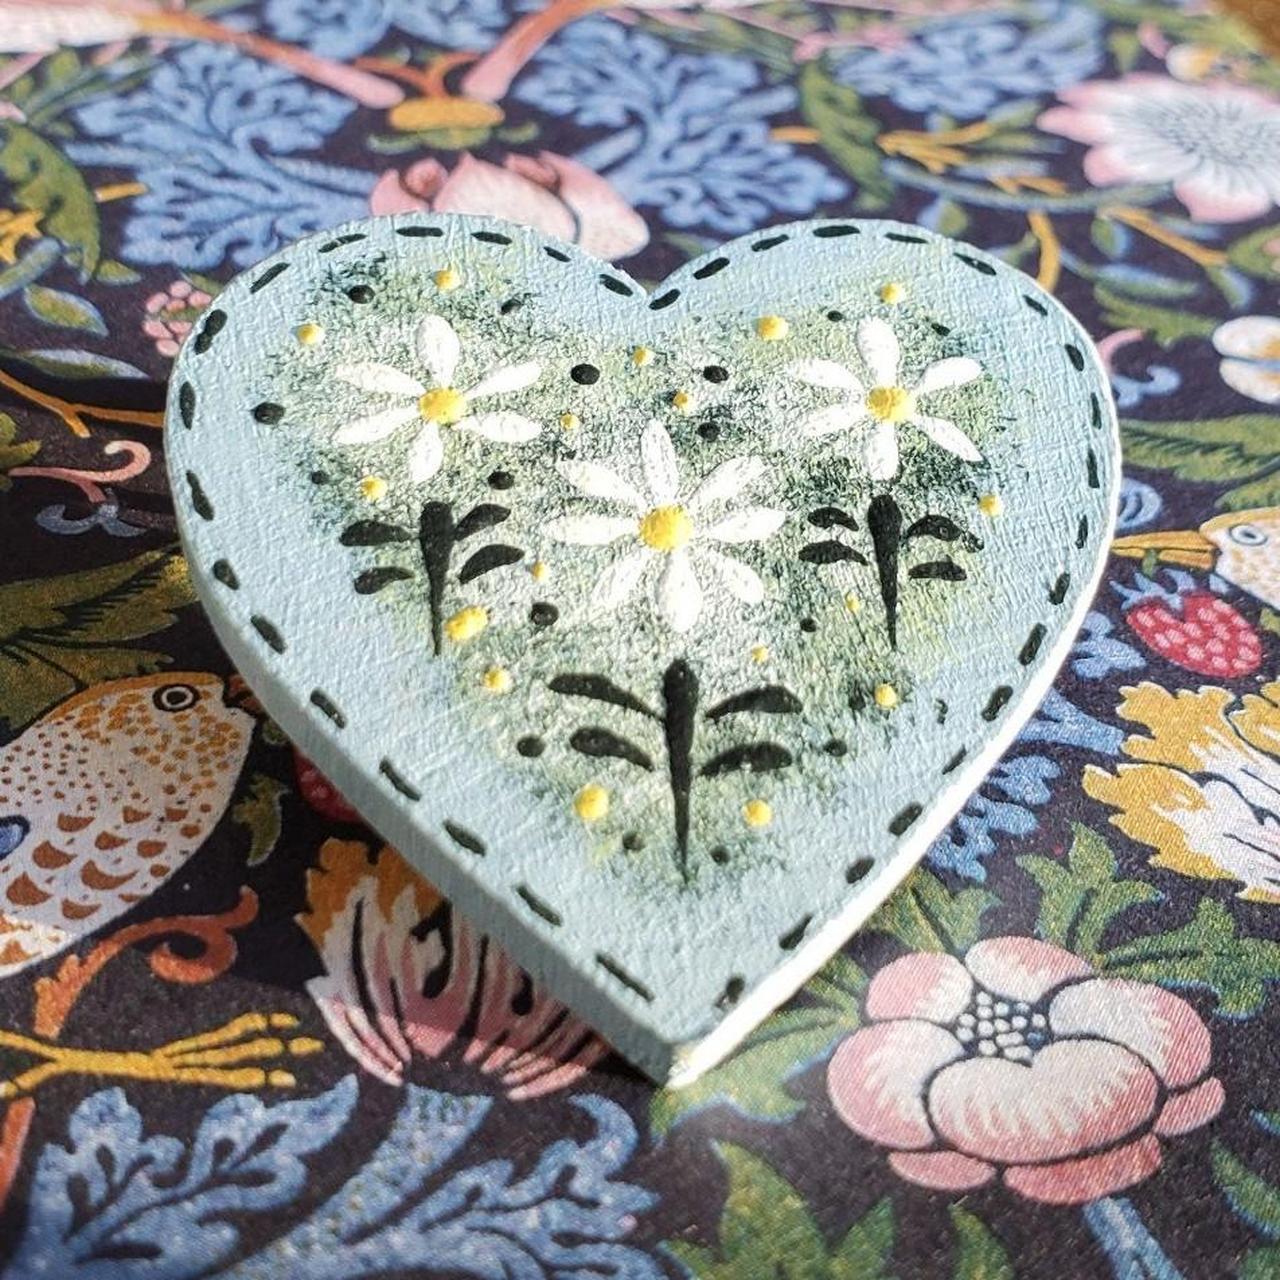 Product Image 1 - Cottagecore Heart Brooch

Lovely little handpainted